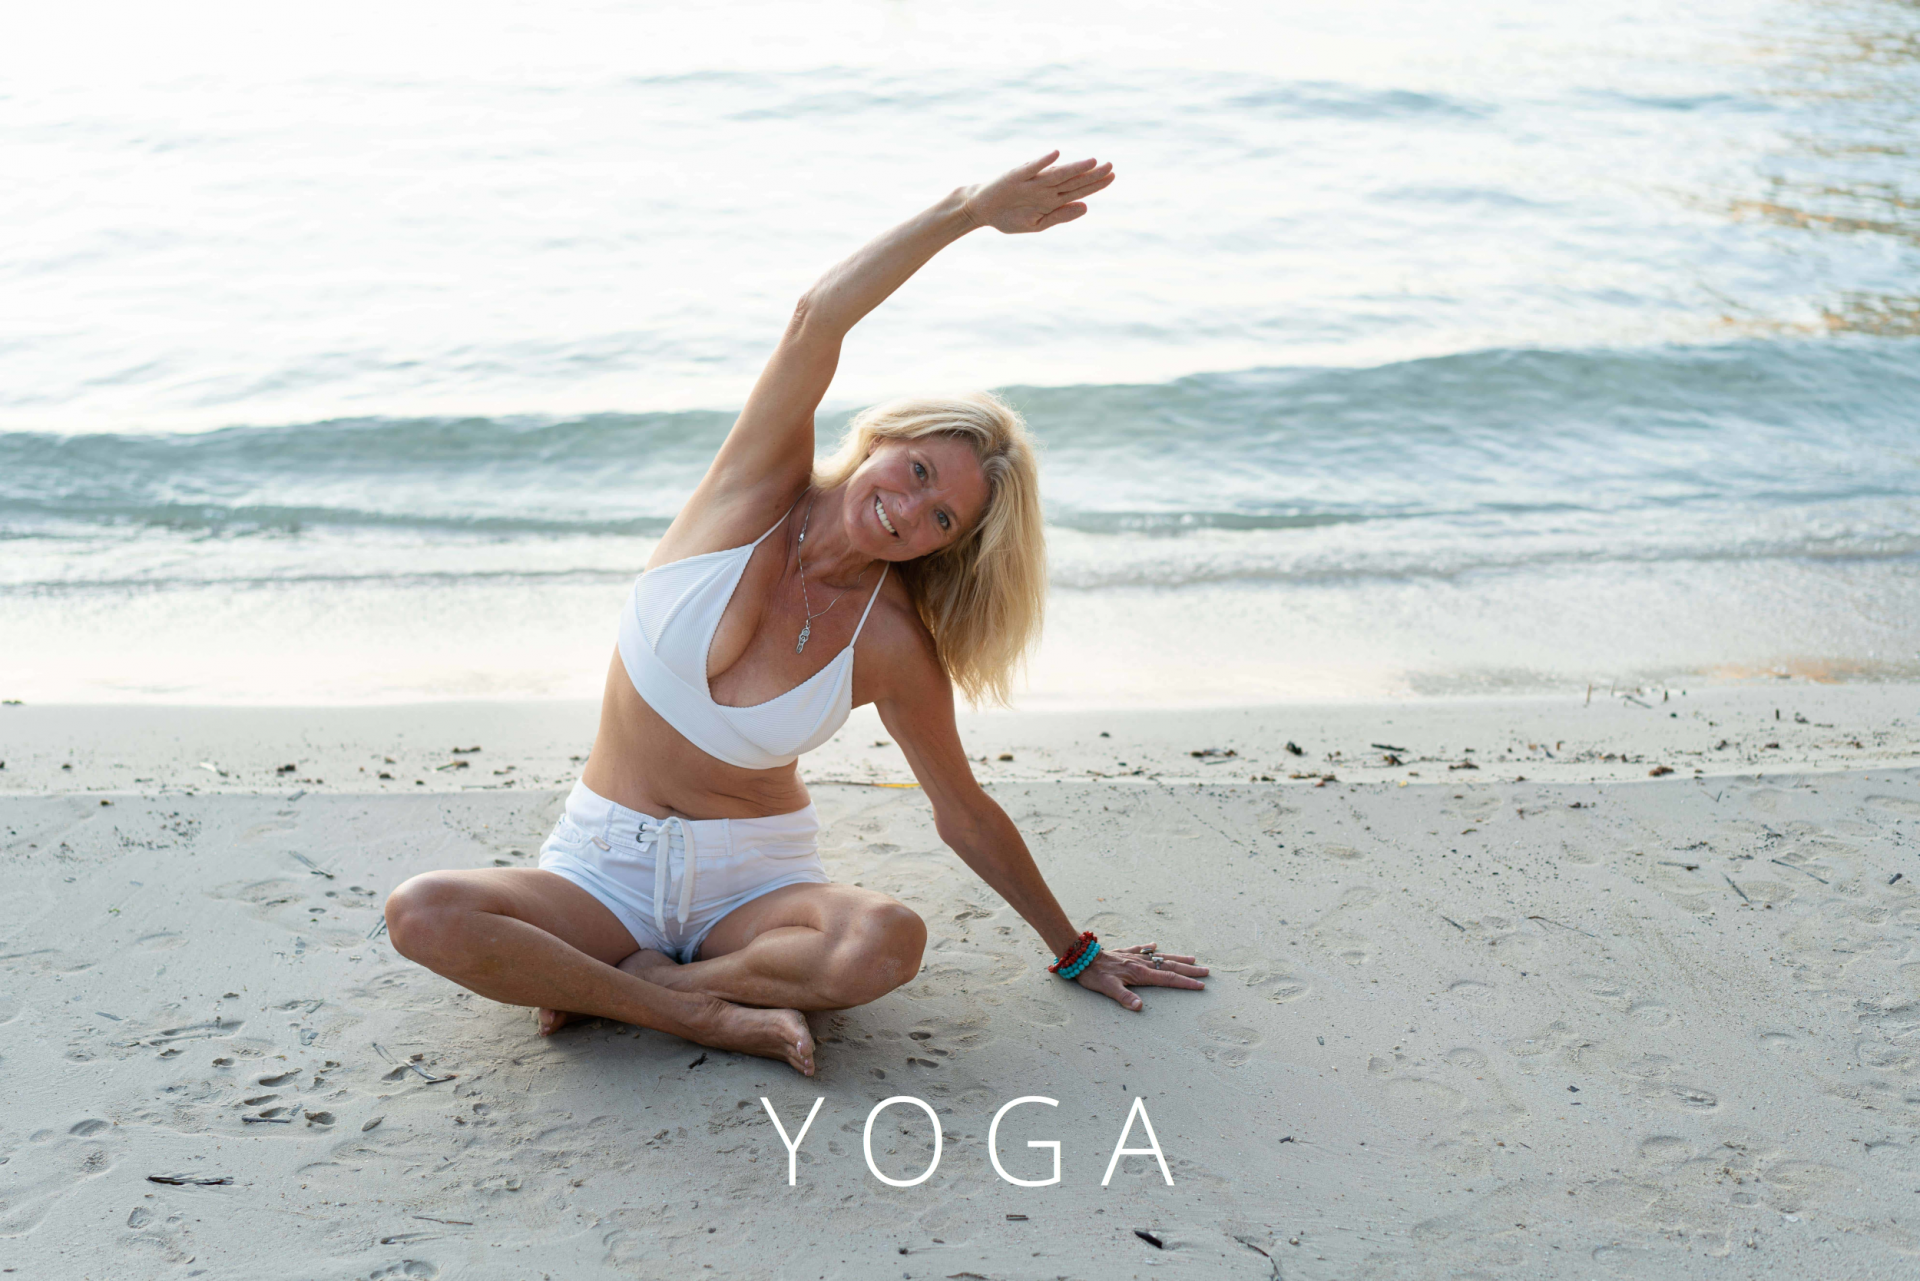 clickable image for yoga page